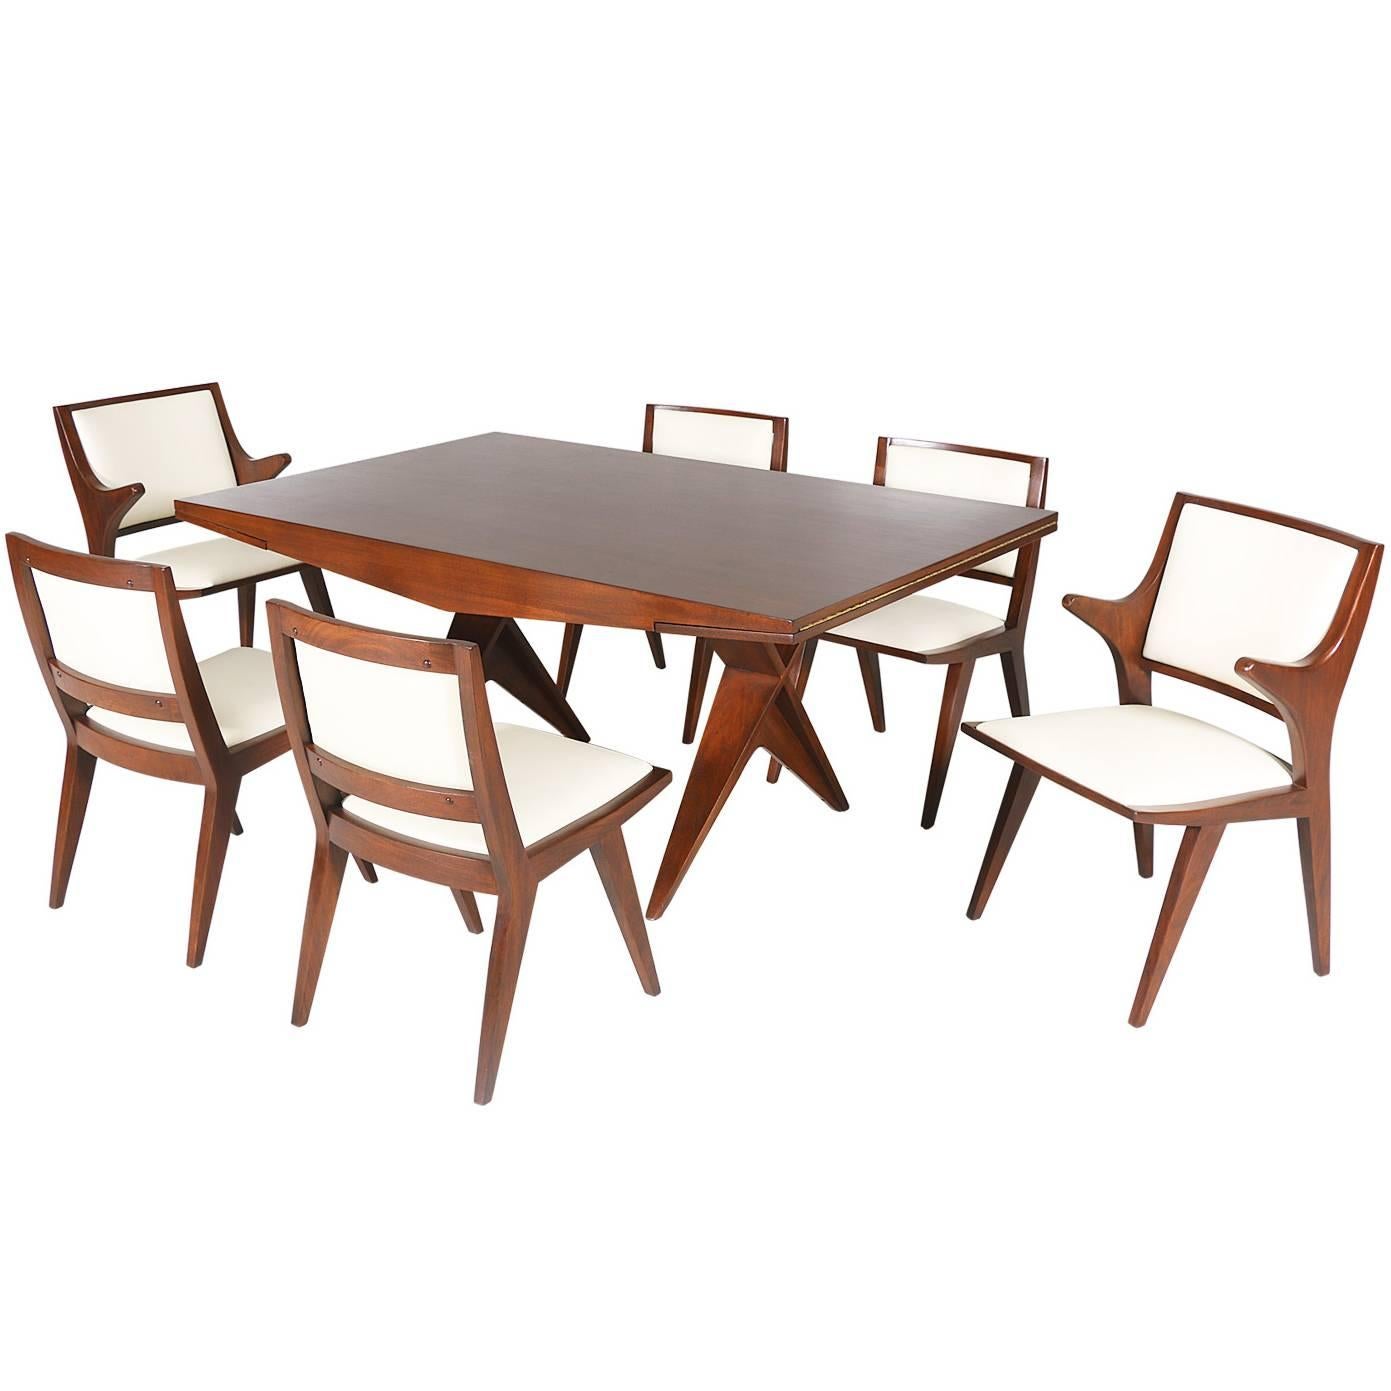 Rare Architectural Dining Table by Dan Johnson for Hayden Hall Furniture